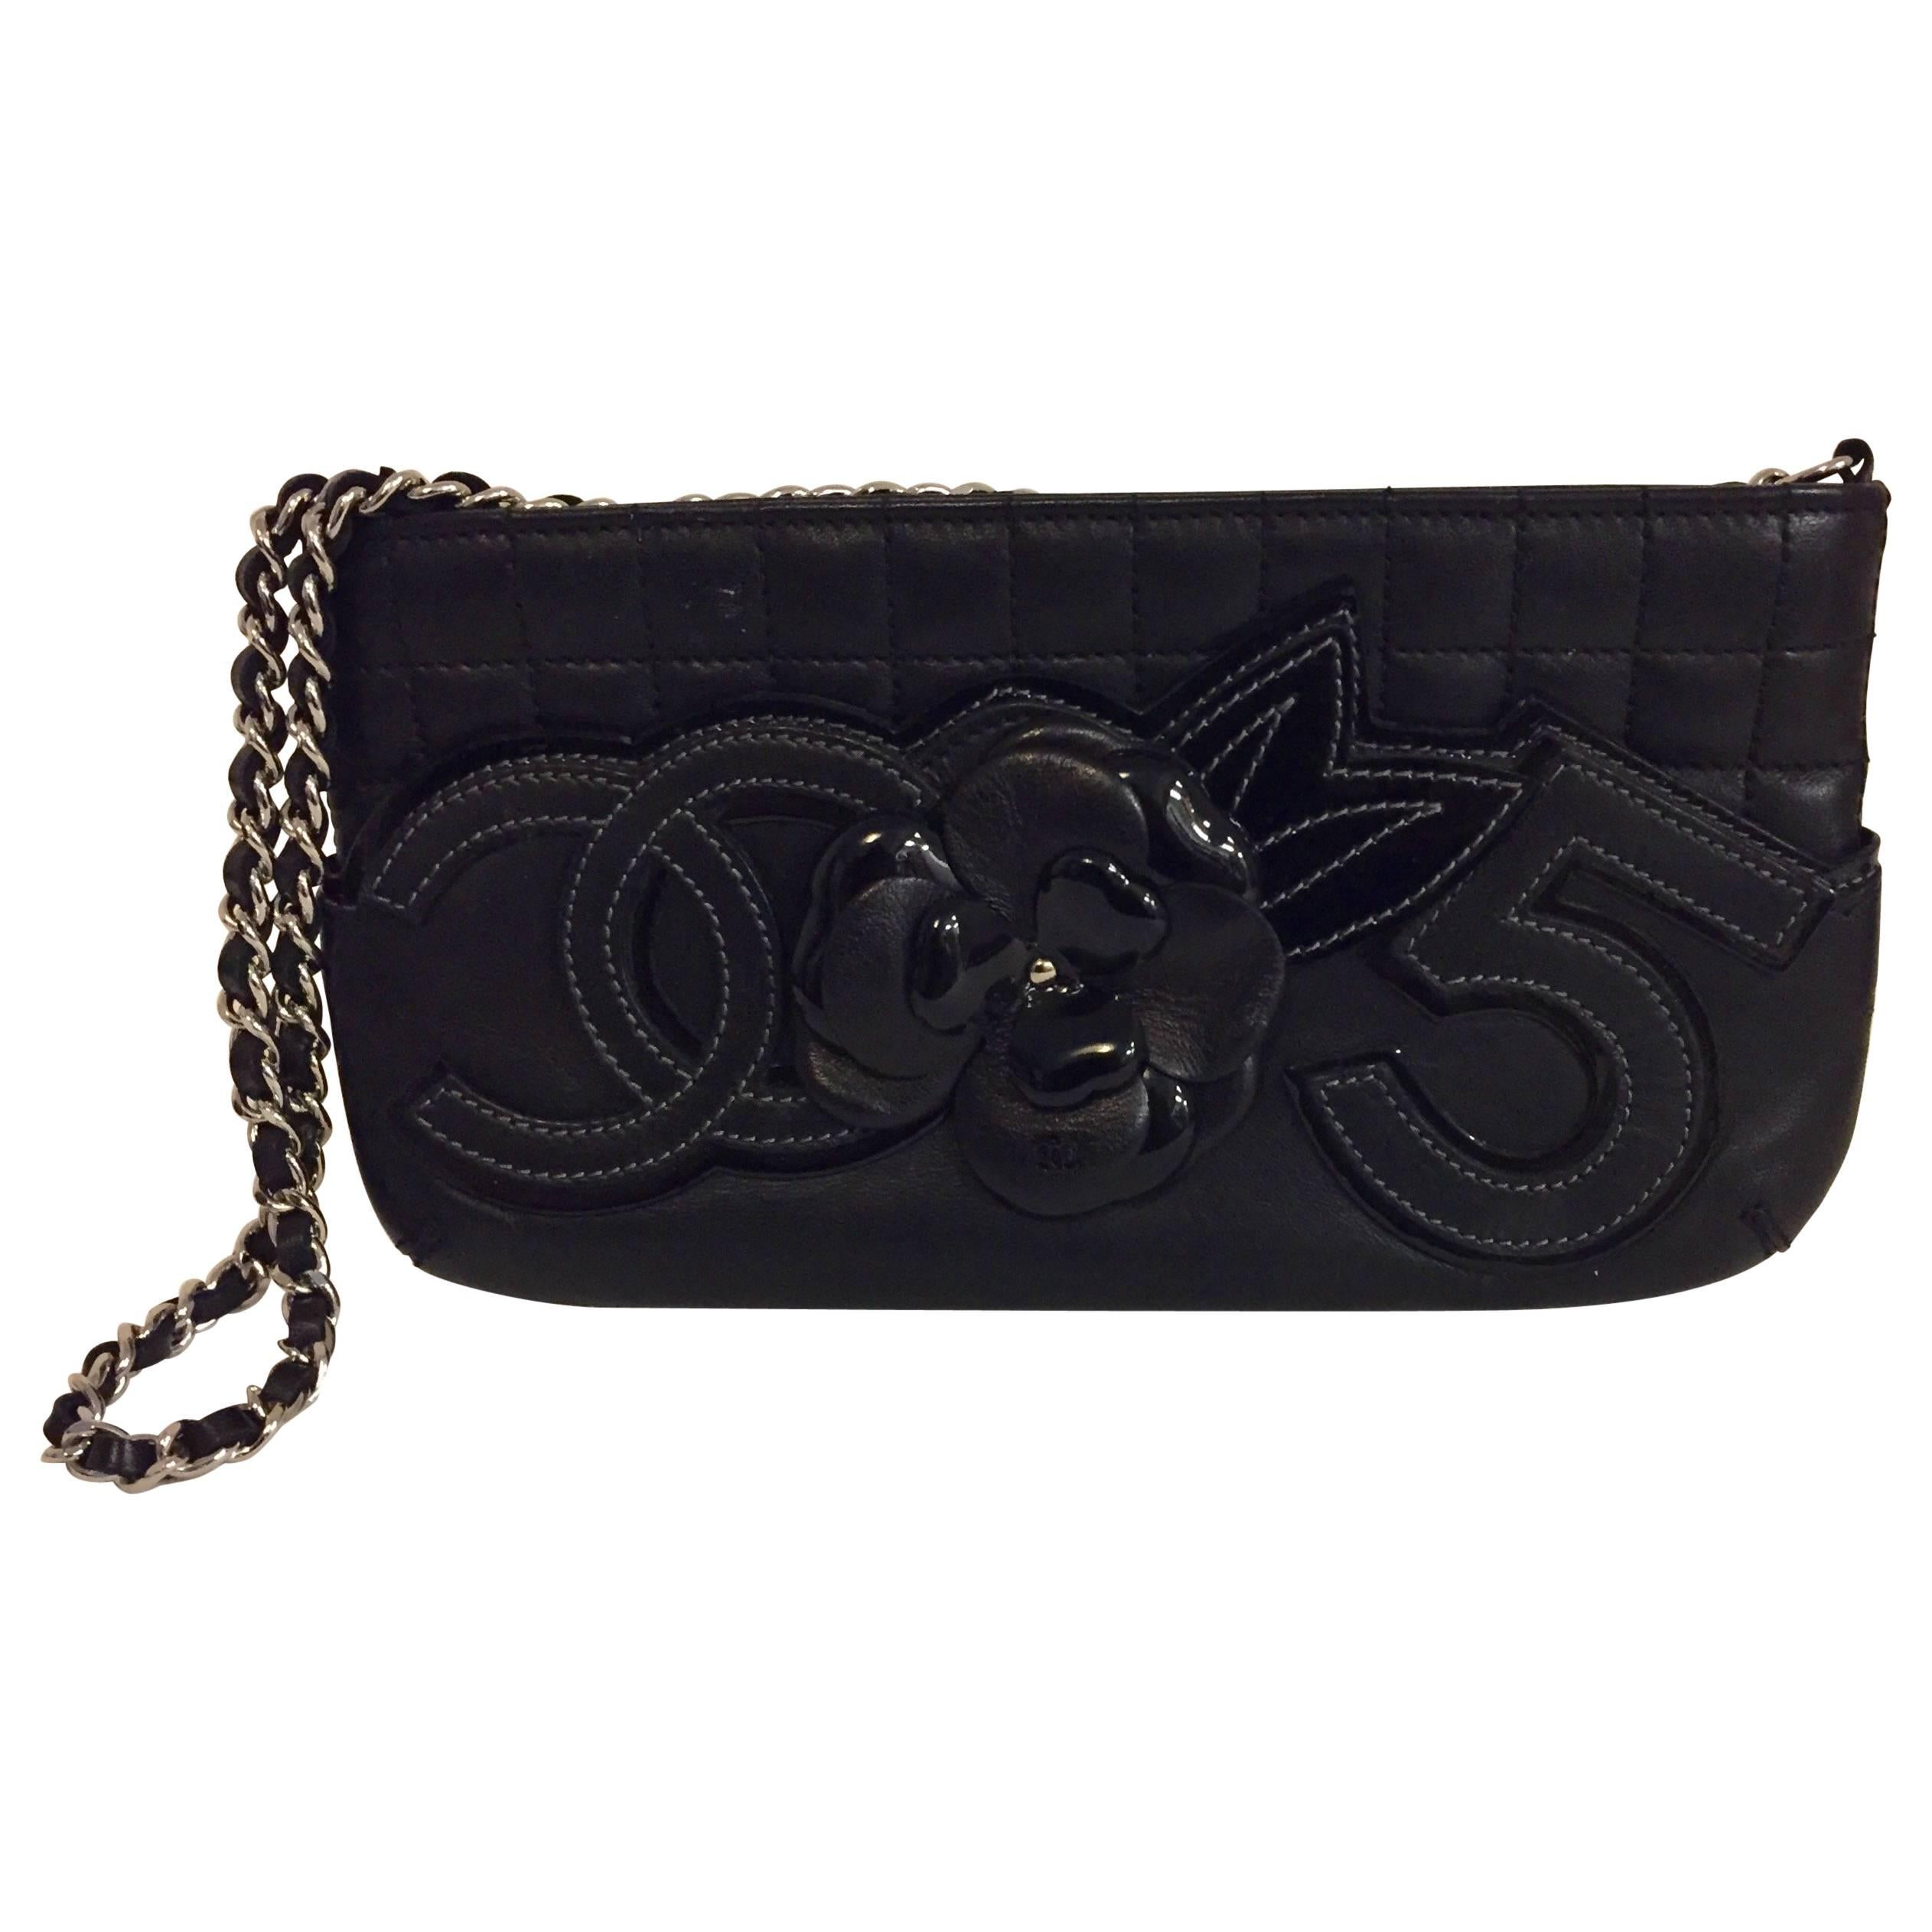 Cherished Chanel No. 5 Black Clutch Bag with Chain and Camellia Flower